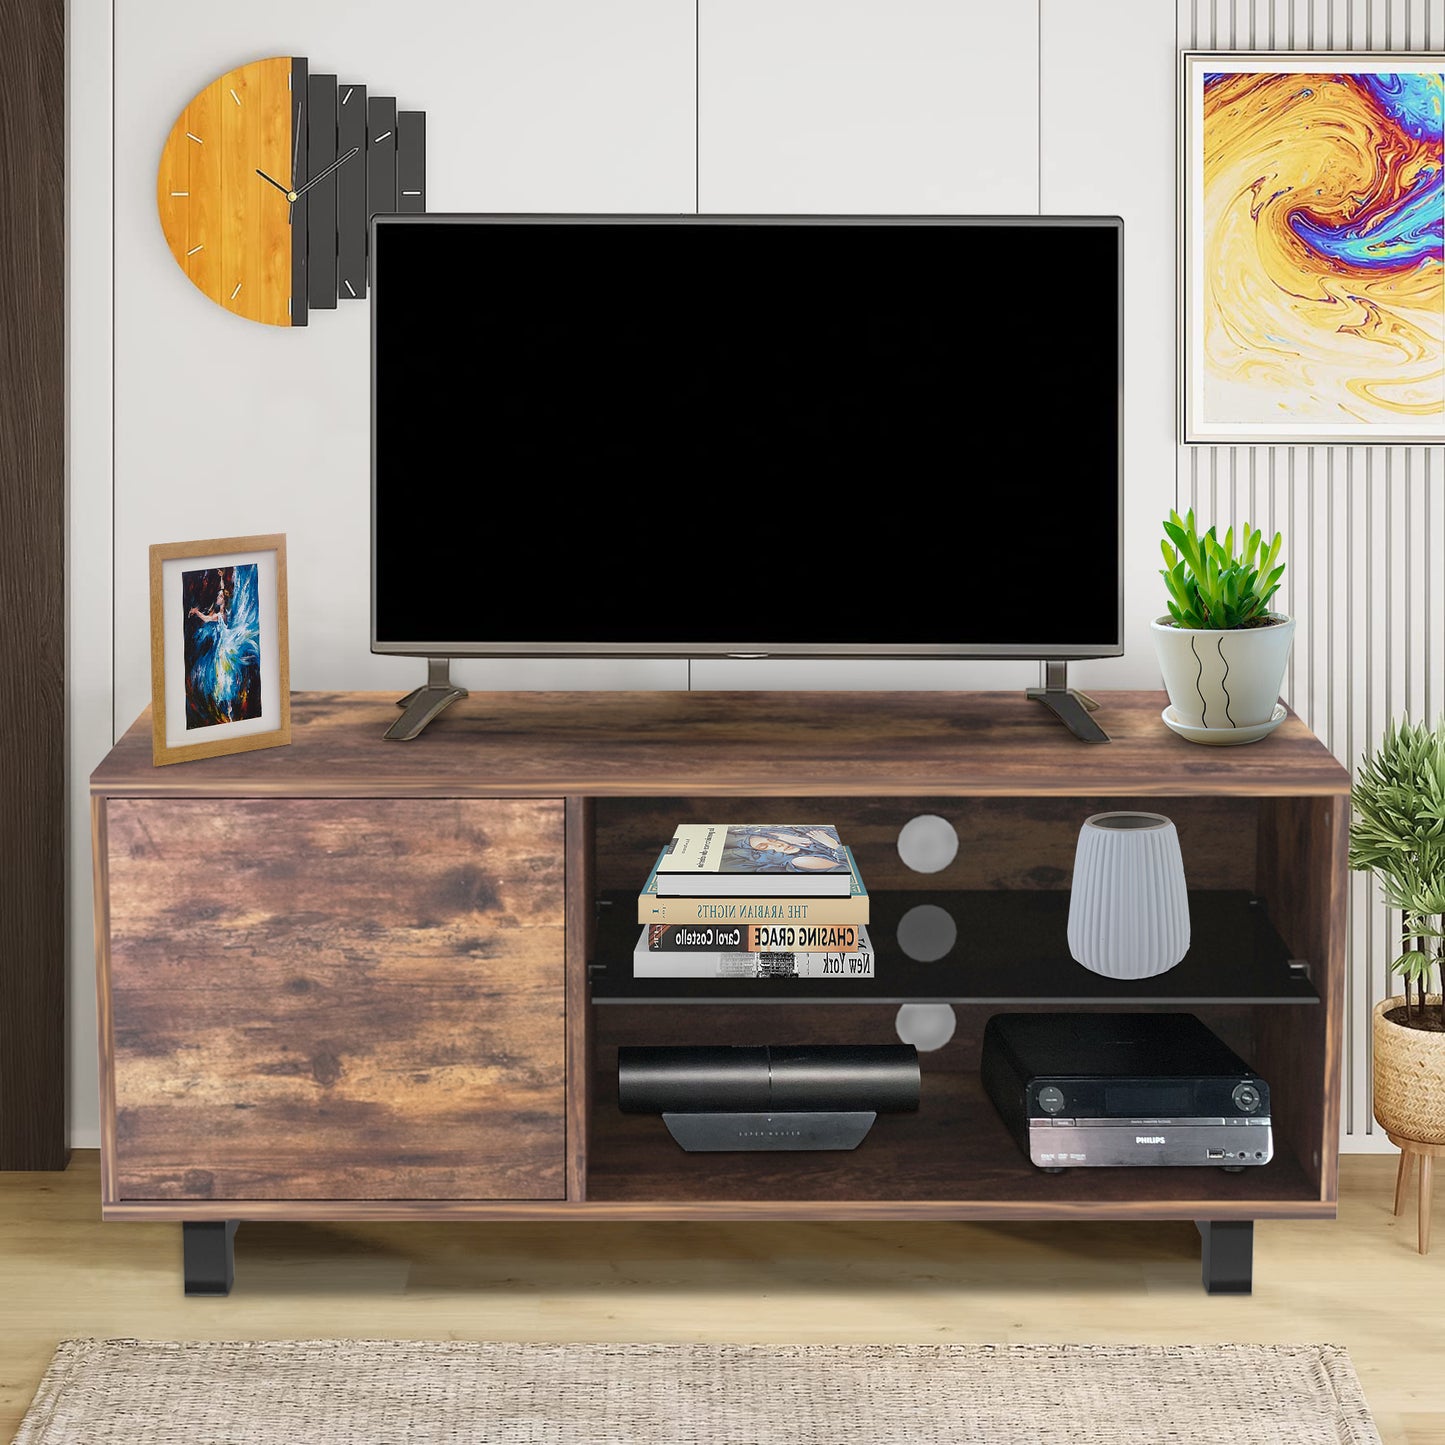 SYNGAR Rustic Brown Farmhouse TV Stand with Mount for 32-65 inch TVs, 2 in 1 TV Mount Stand Table Storage Cabinet Entertainment Center, Swivel Floor TV Stand Mount for Living Room Bedroom Office